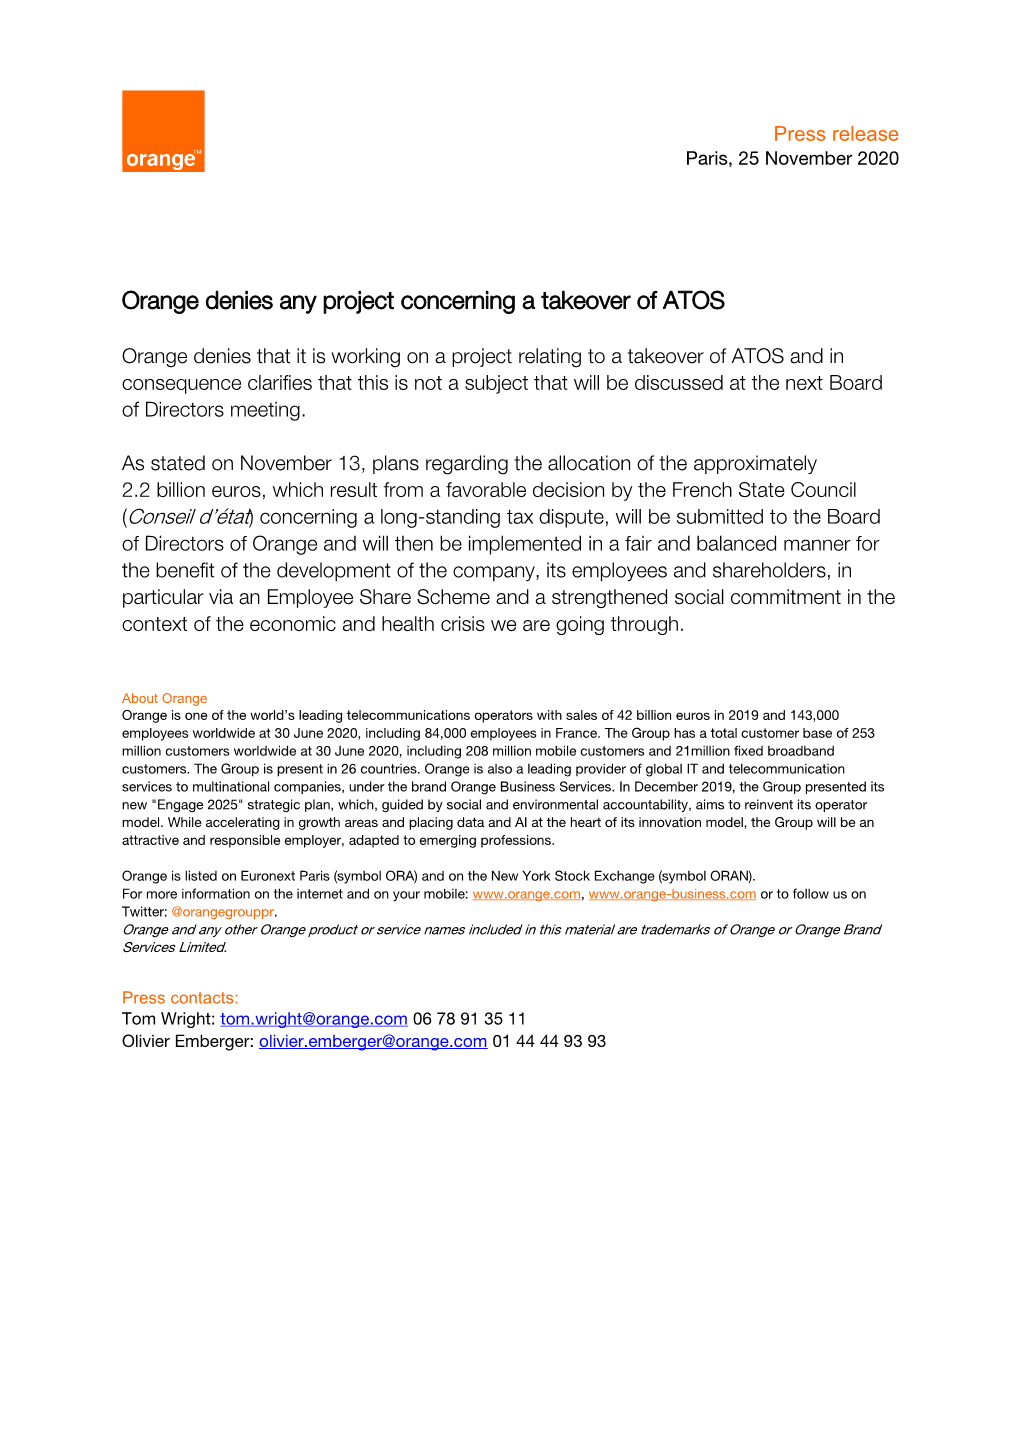 Orange Denies Any Project Concerning a Takeover of ATOS